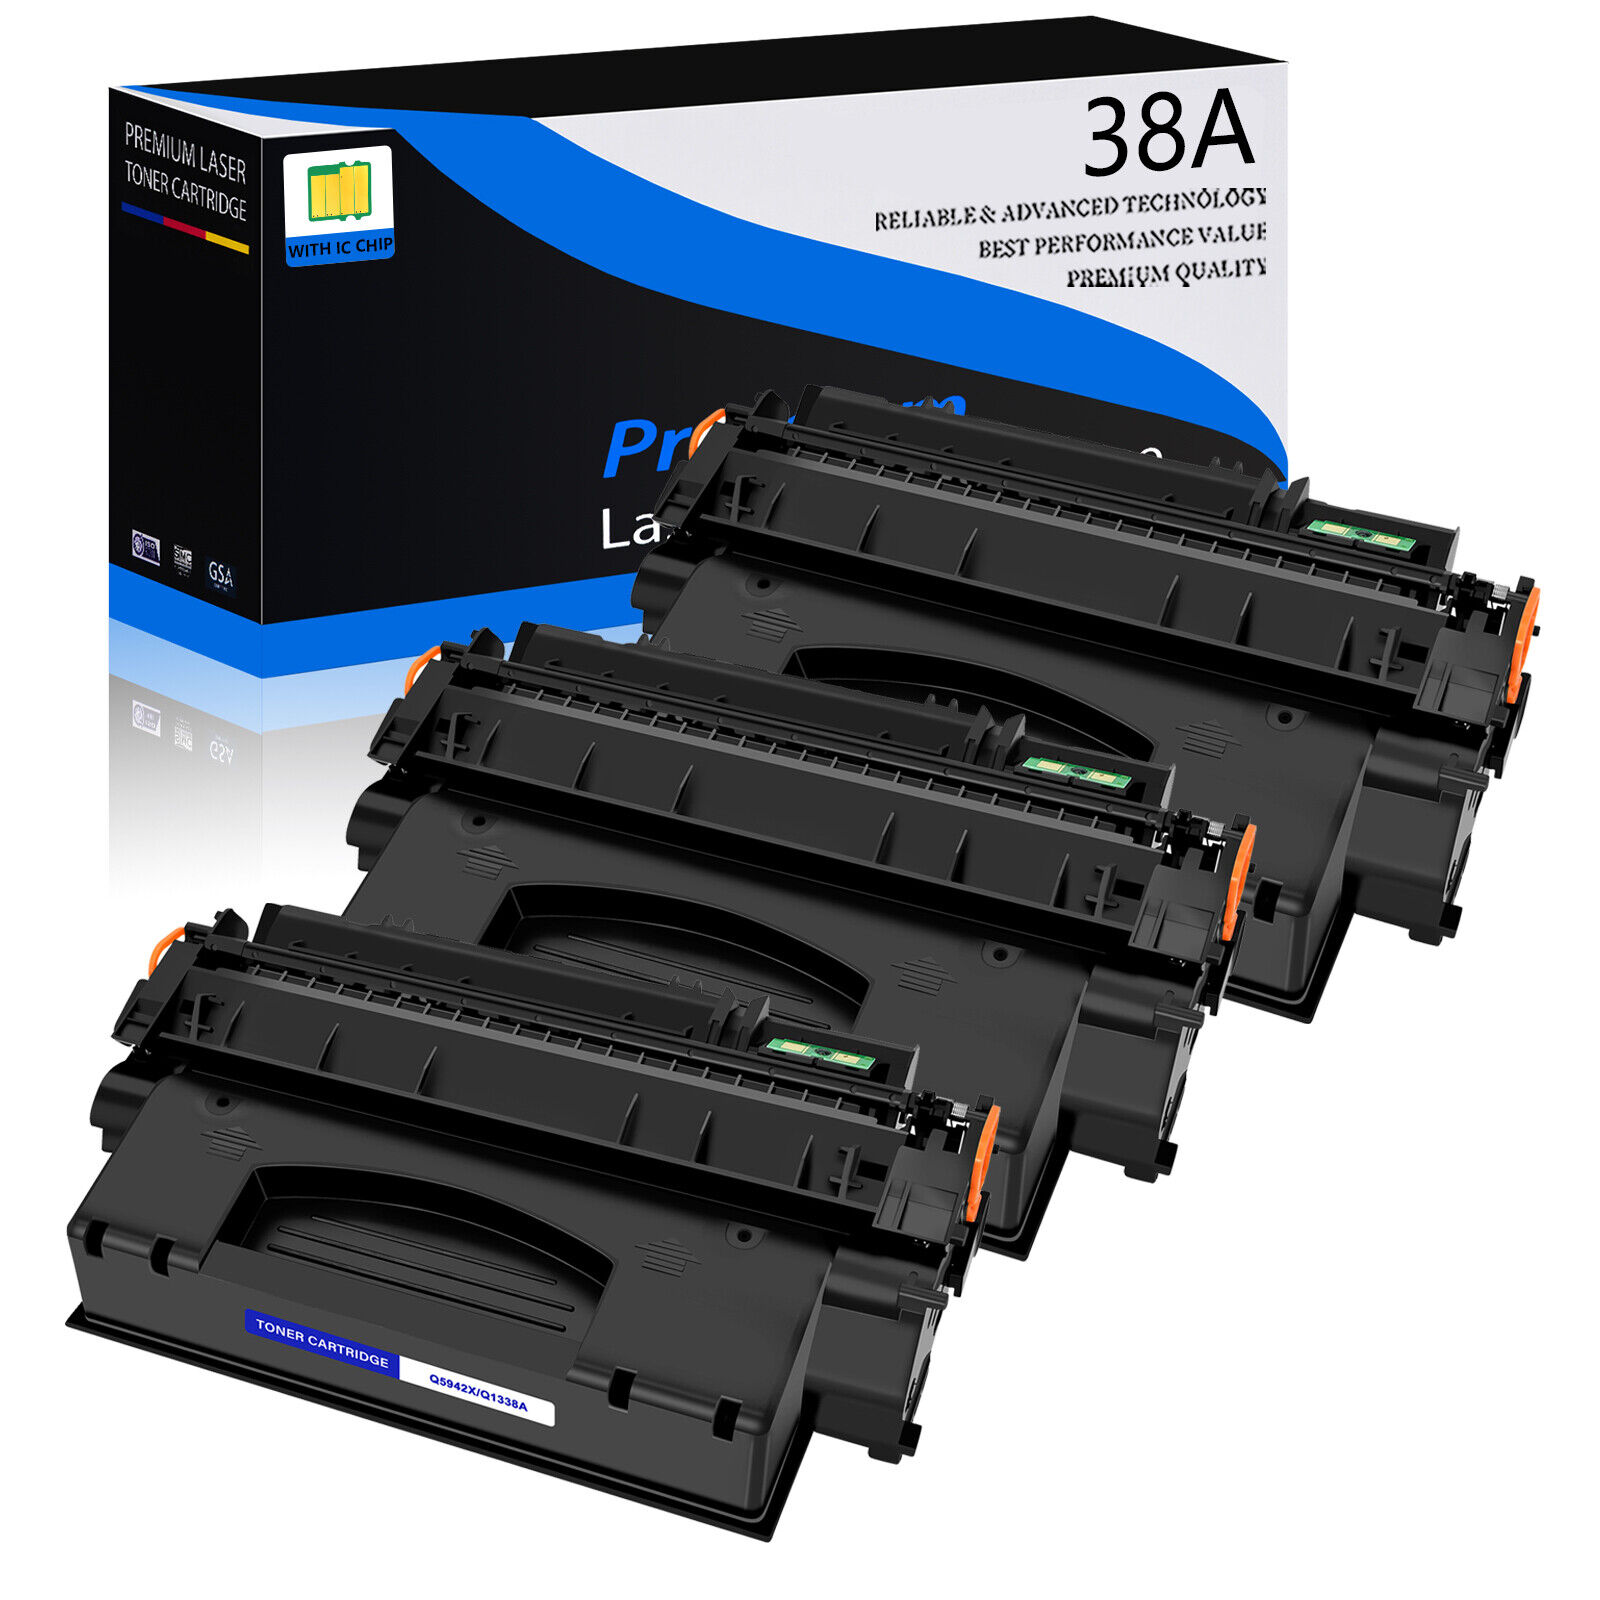 3 Pack Compatible For HP Q1338A 38A Toner LaserJet 4200dtn 4200 4200tn 4200dtns